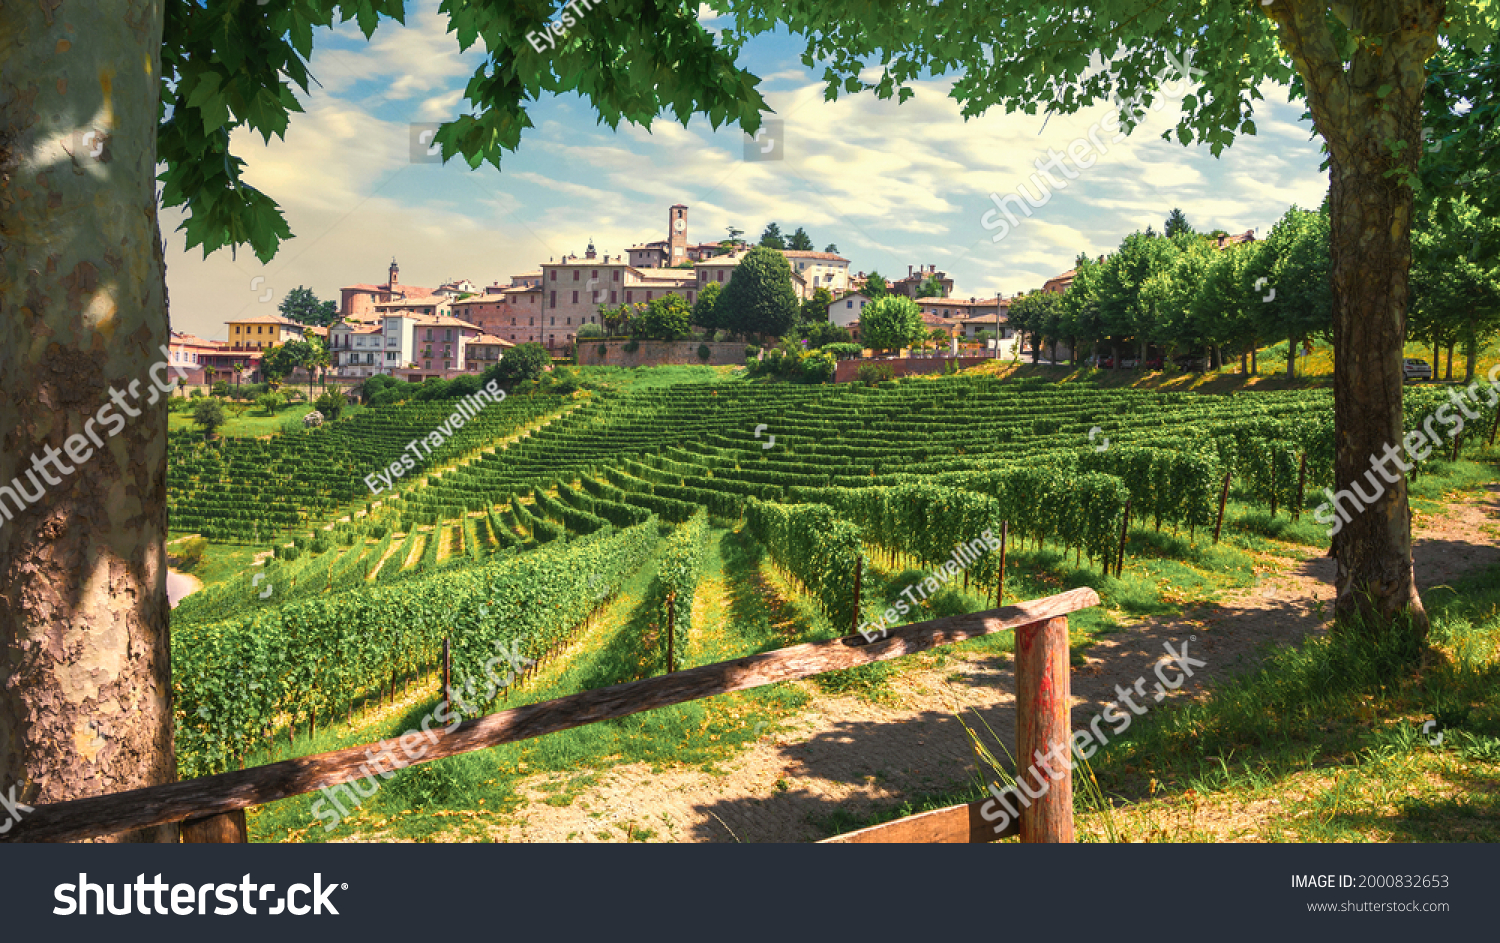 Neive village and Langhe vineyards, Unesco Site, Piedmont, Northern Italy Europe. High quality photo #2000832653